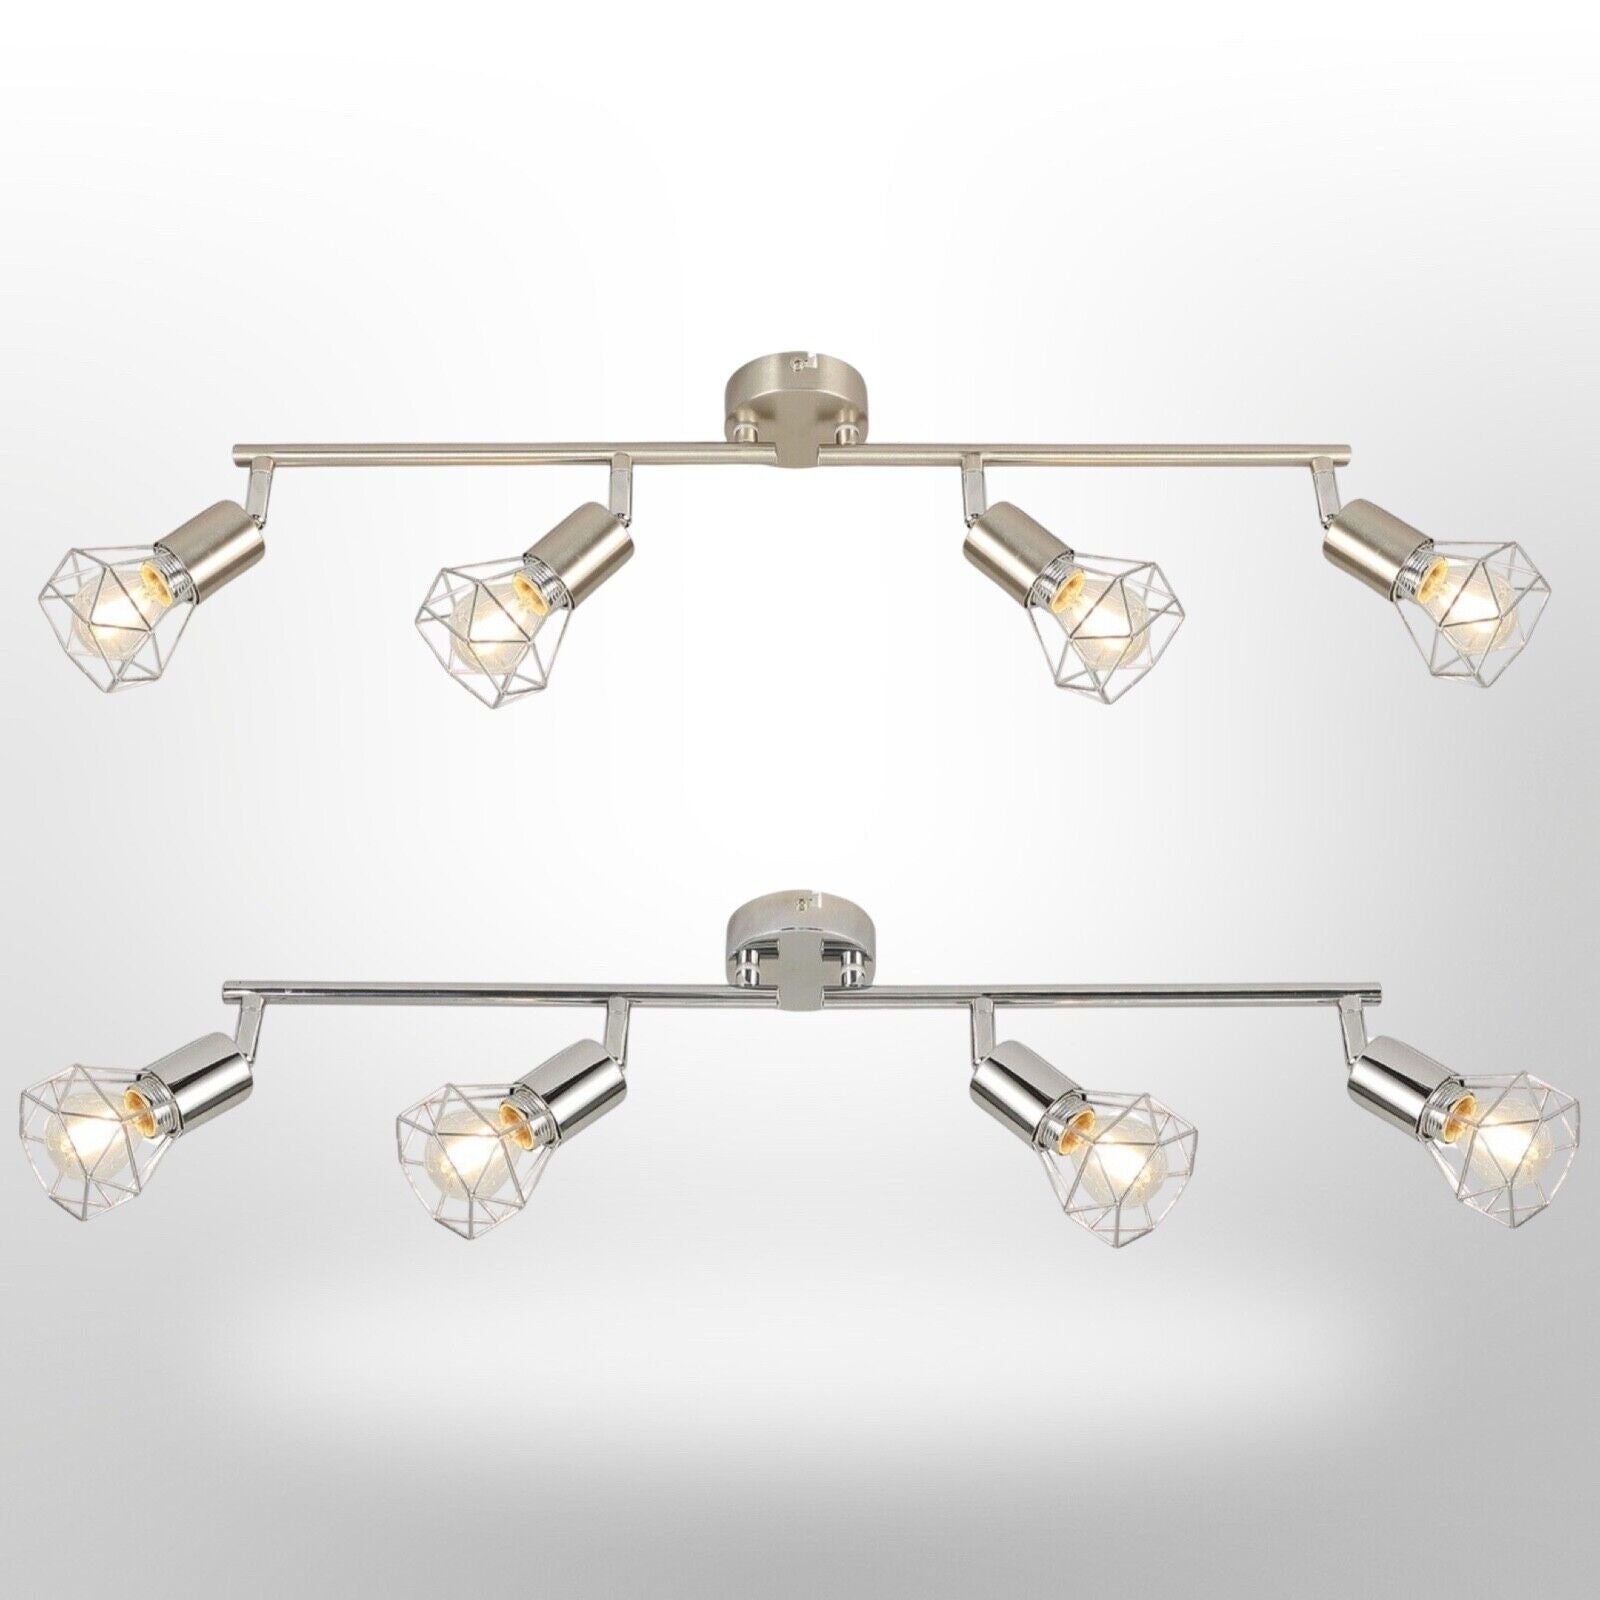 Cage Ceiling Light Industrial 4-Way Fitting Straight Bar and Rotatable